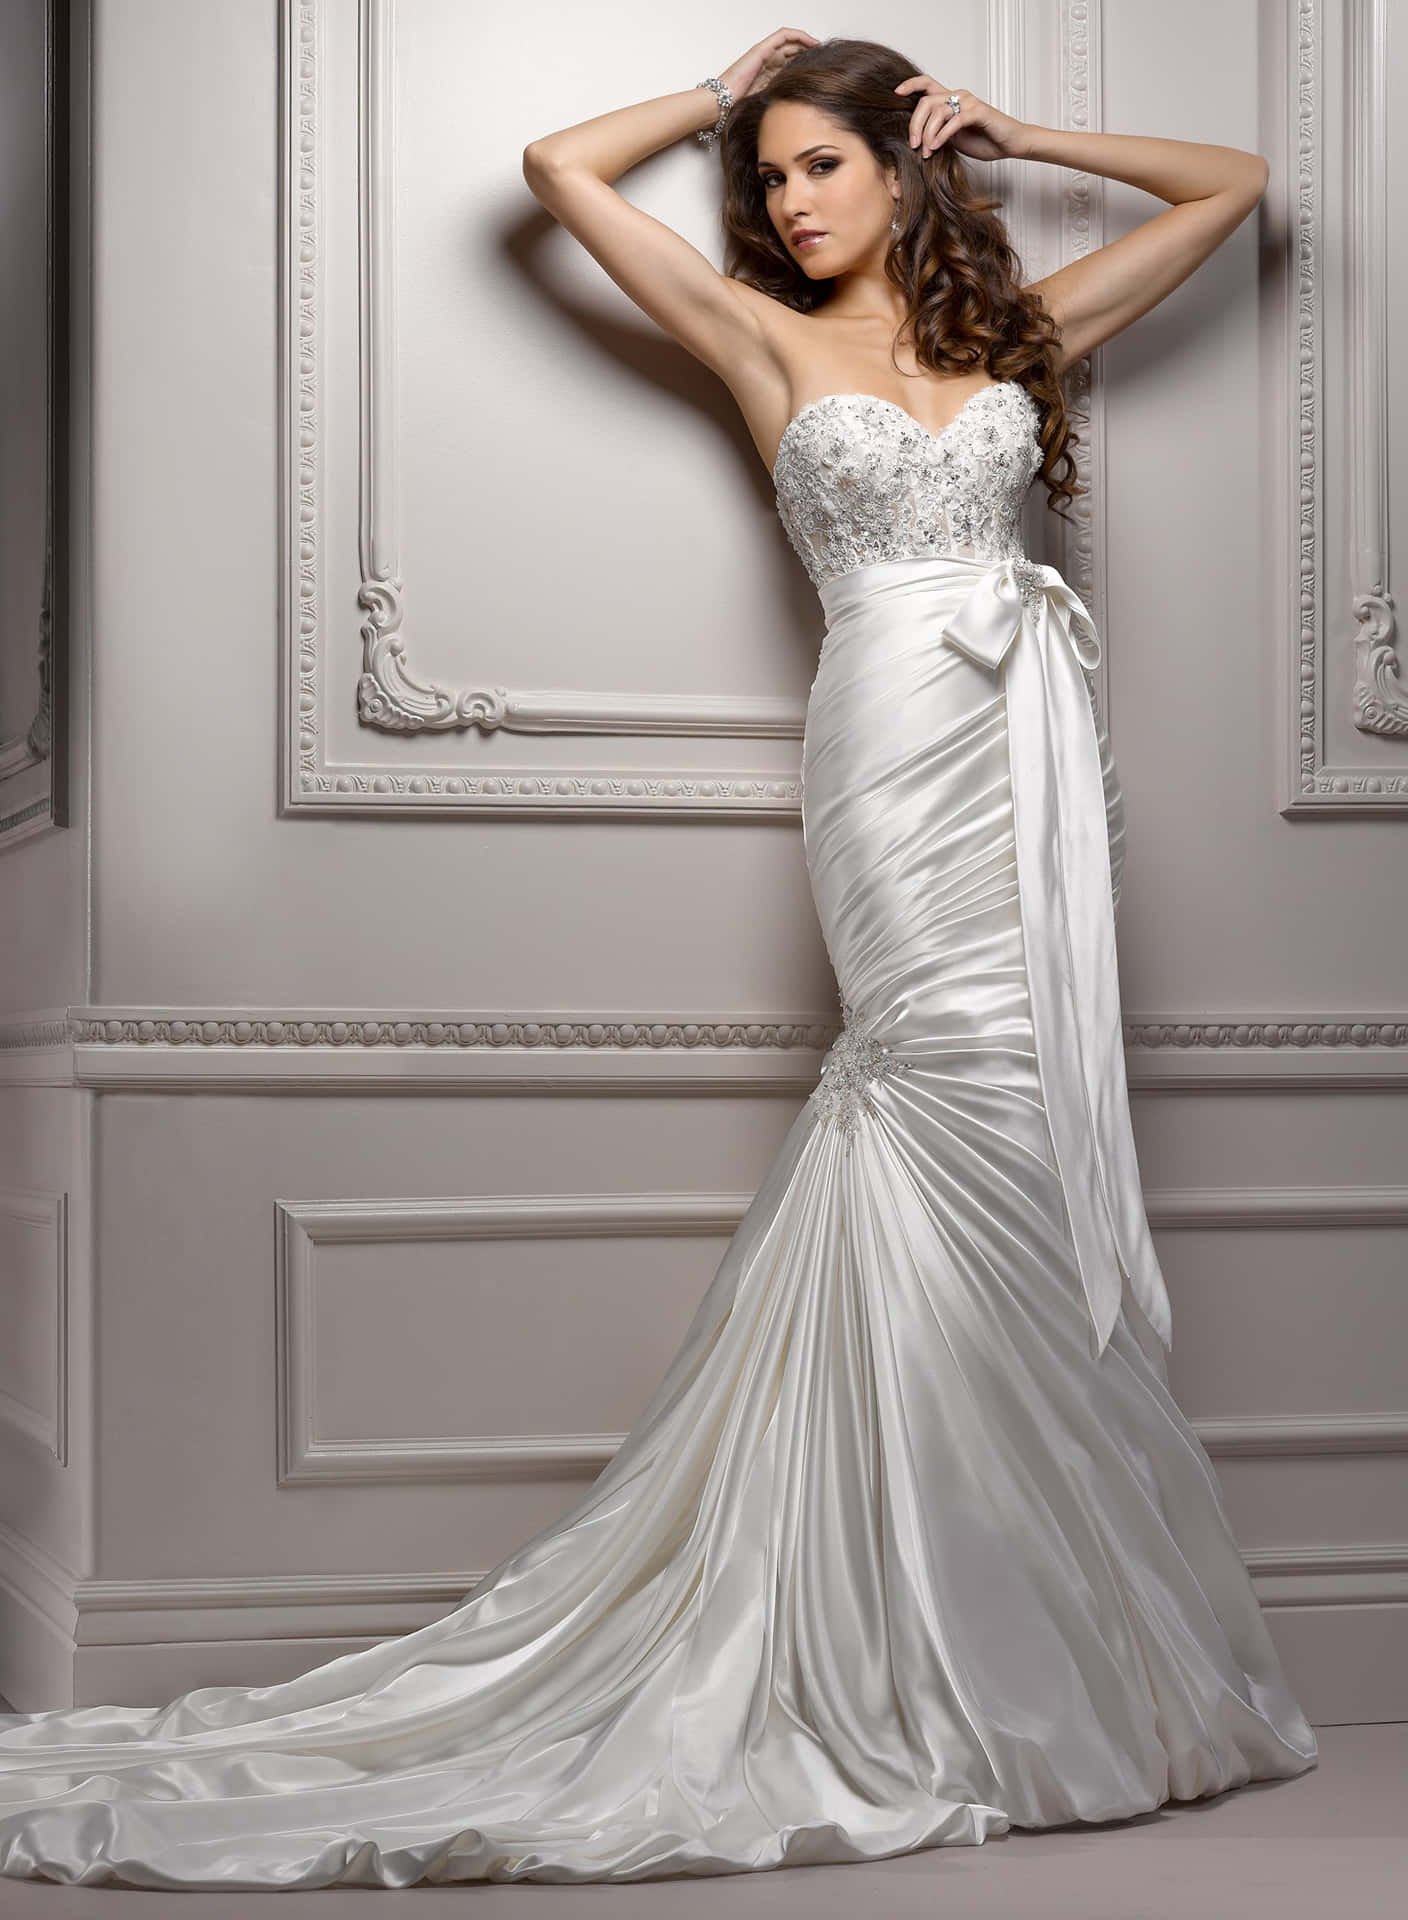 All eyes will be on the bride with this breathtaking wedding gown.